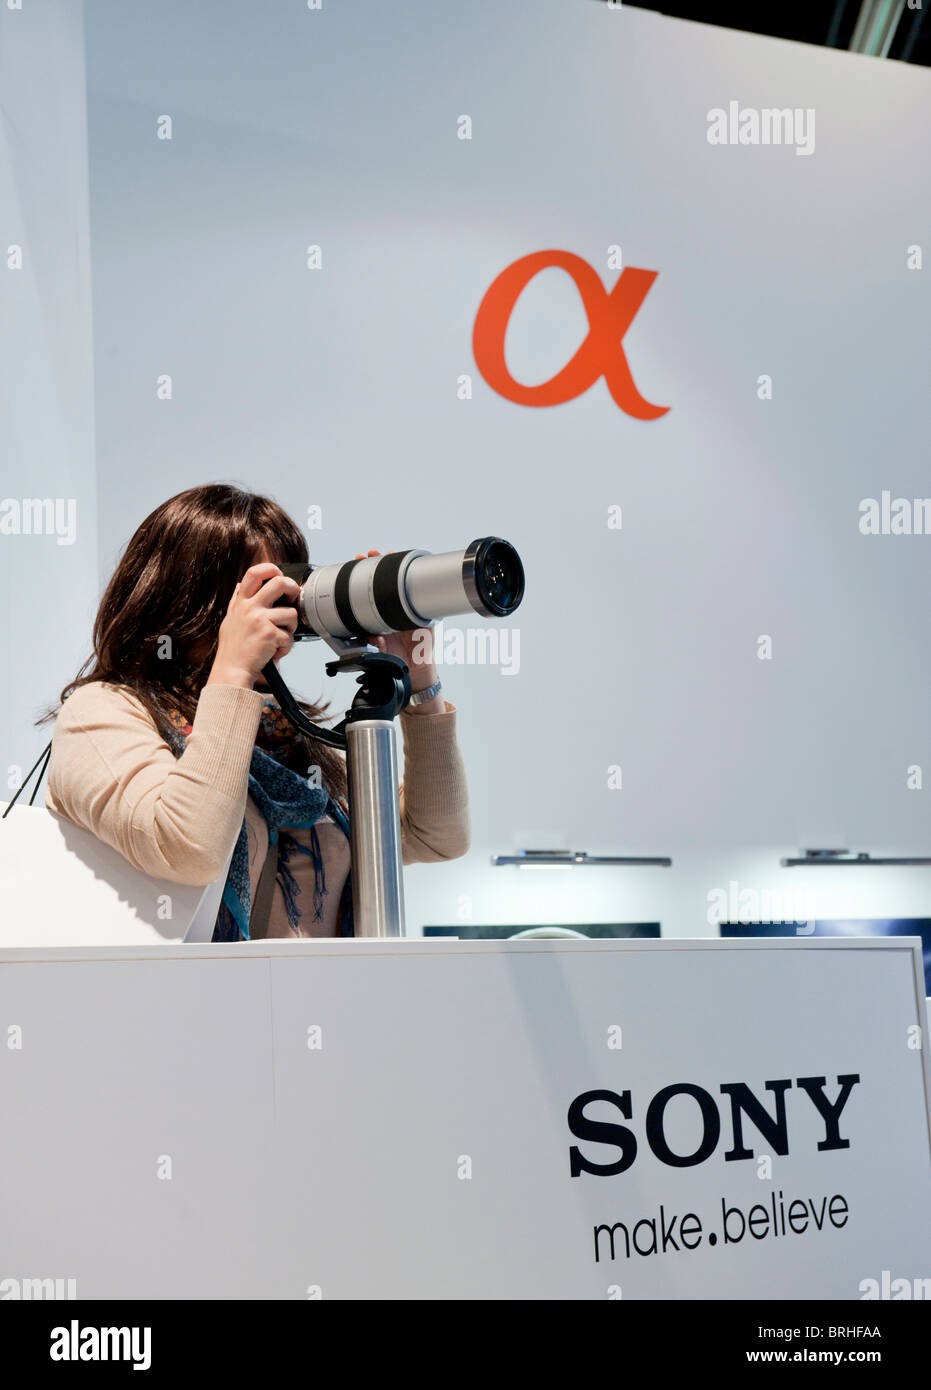 Female visitor using Sony camera and lens at Photokina digital imaging trade show in Cologne Germany Stock Photo